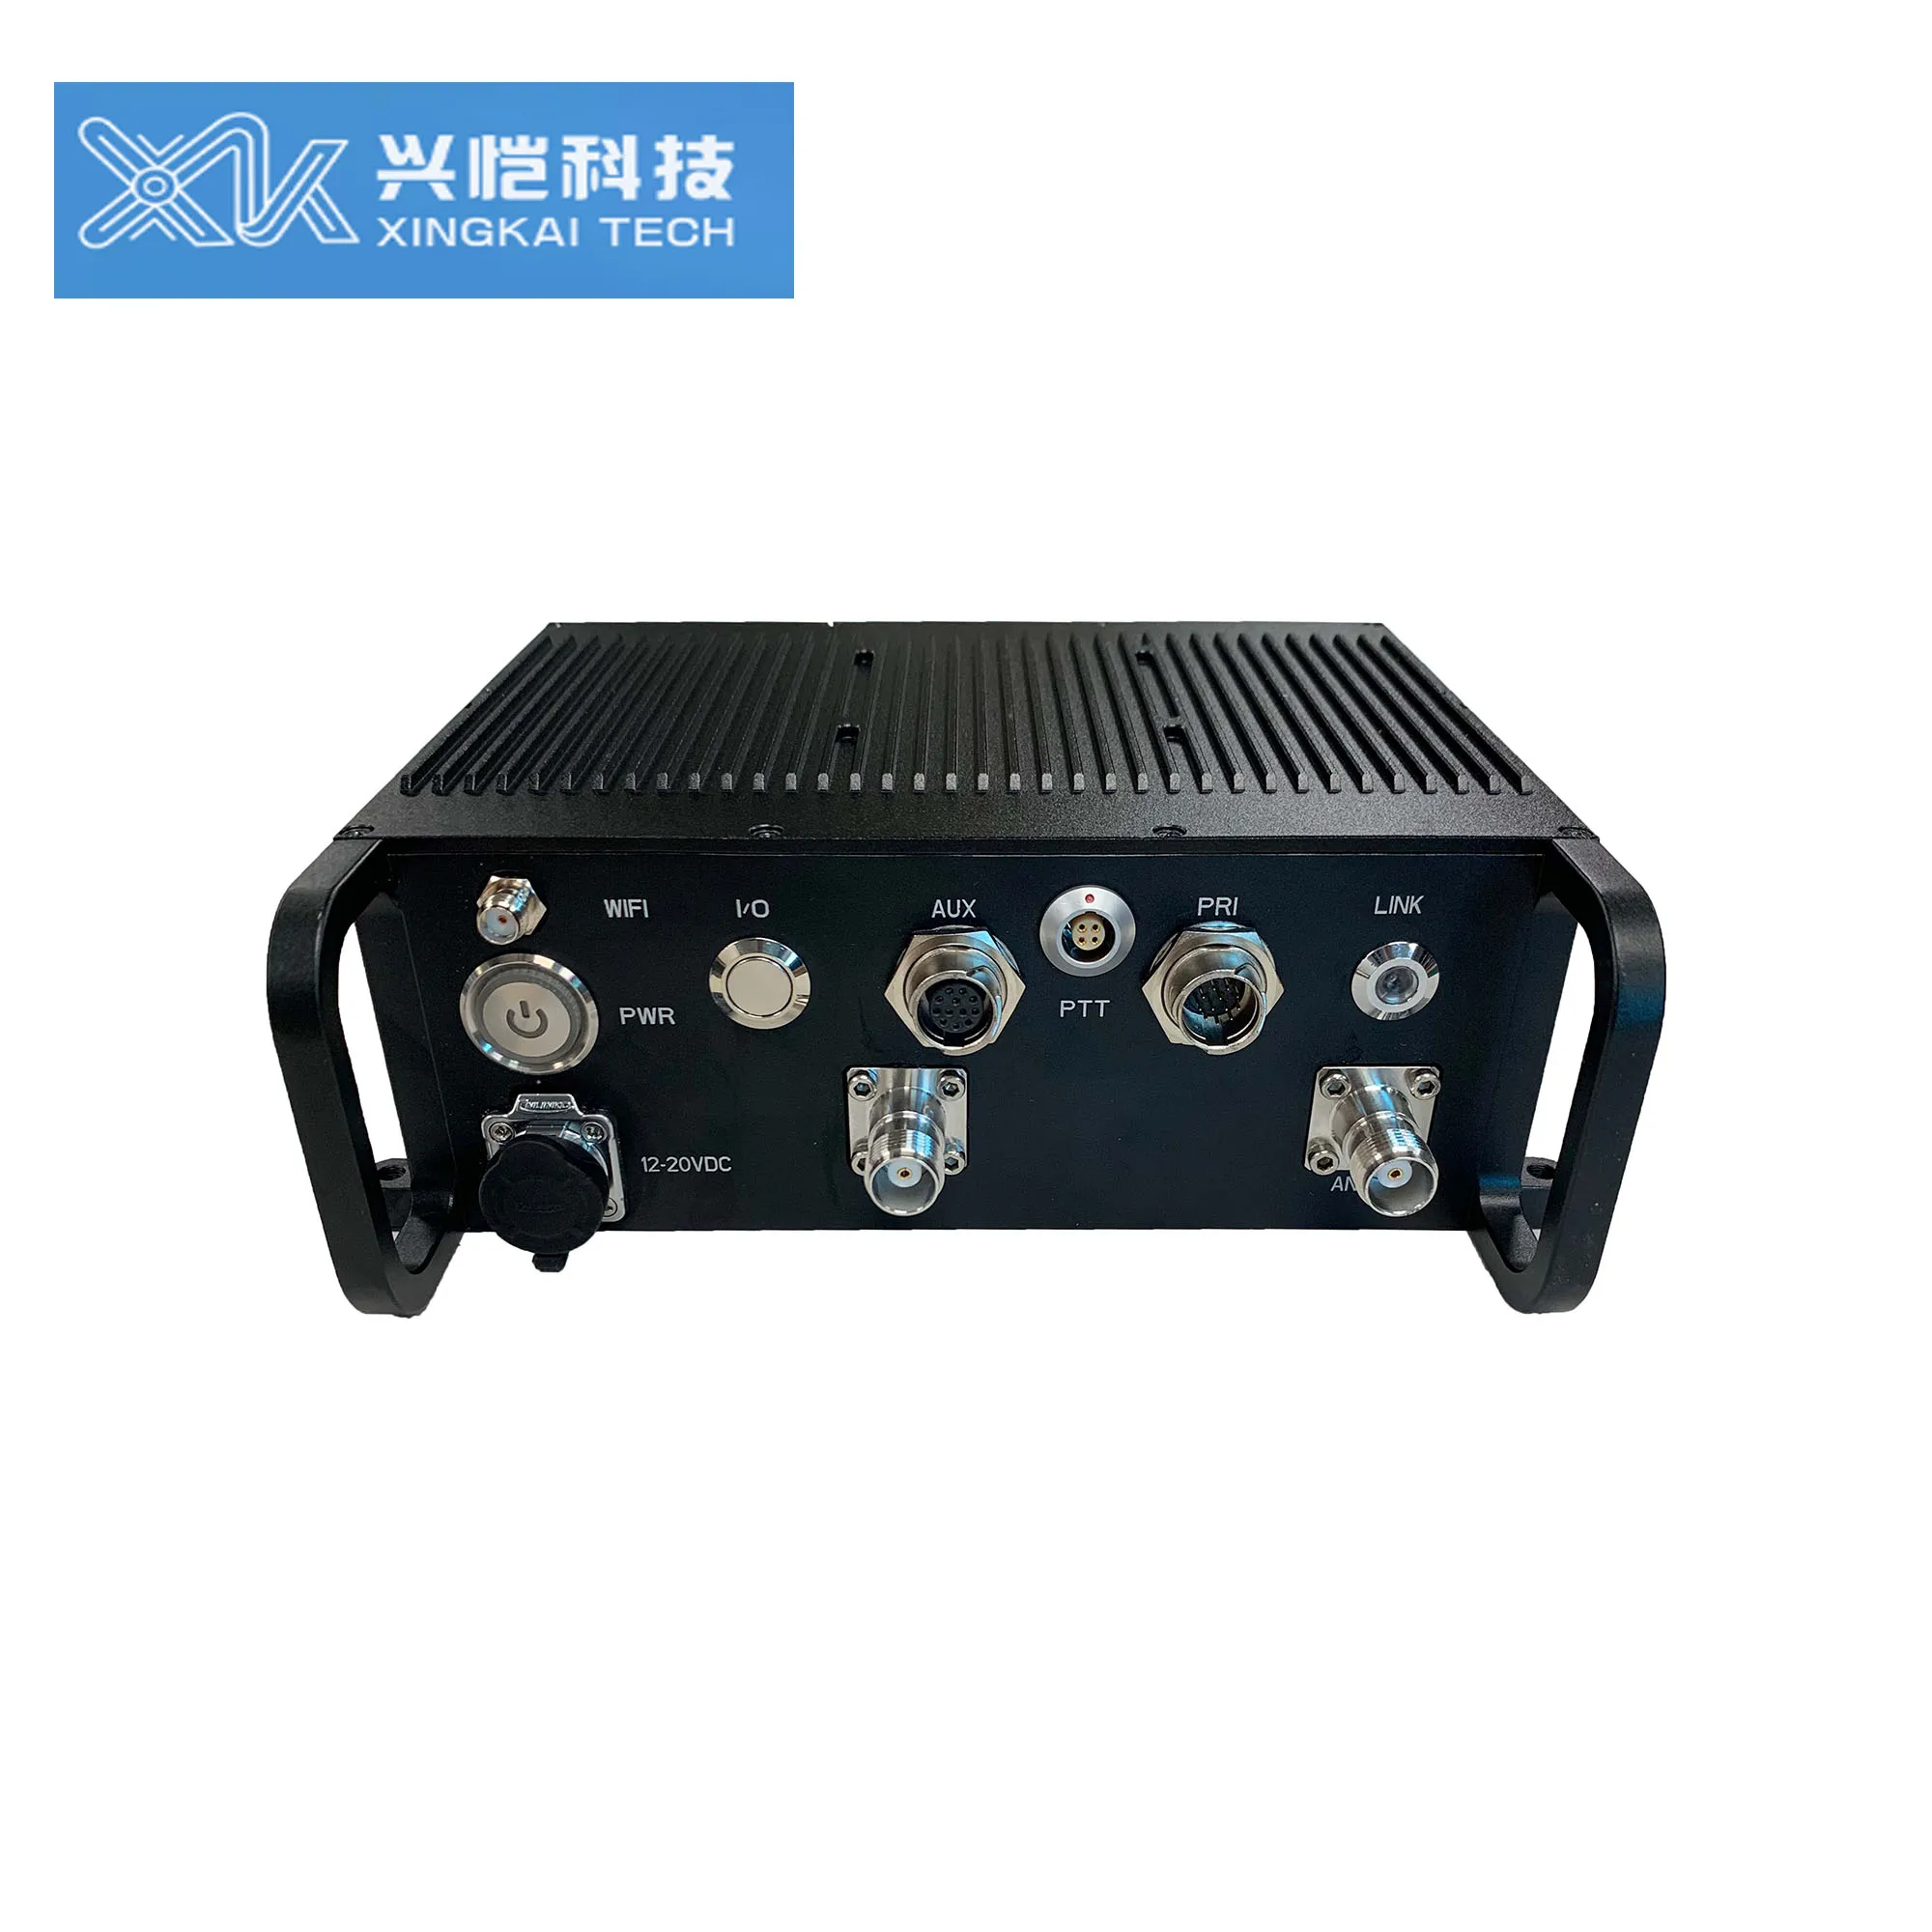 COFDM Mimo Wifi Network Mesh Radios Broadband Hopping Frequency Long Range Waveforms Military Communication Tactical Army